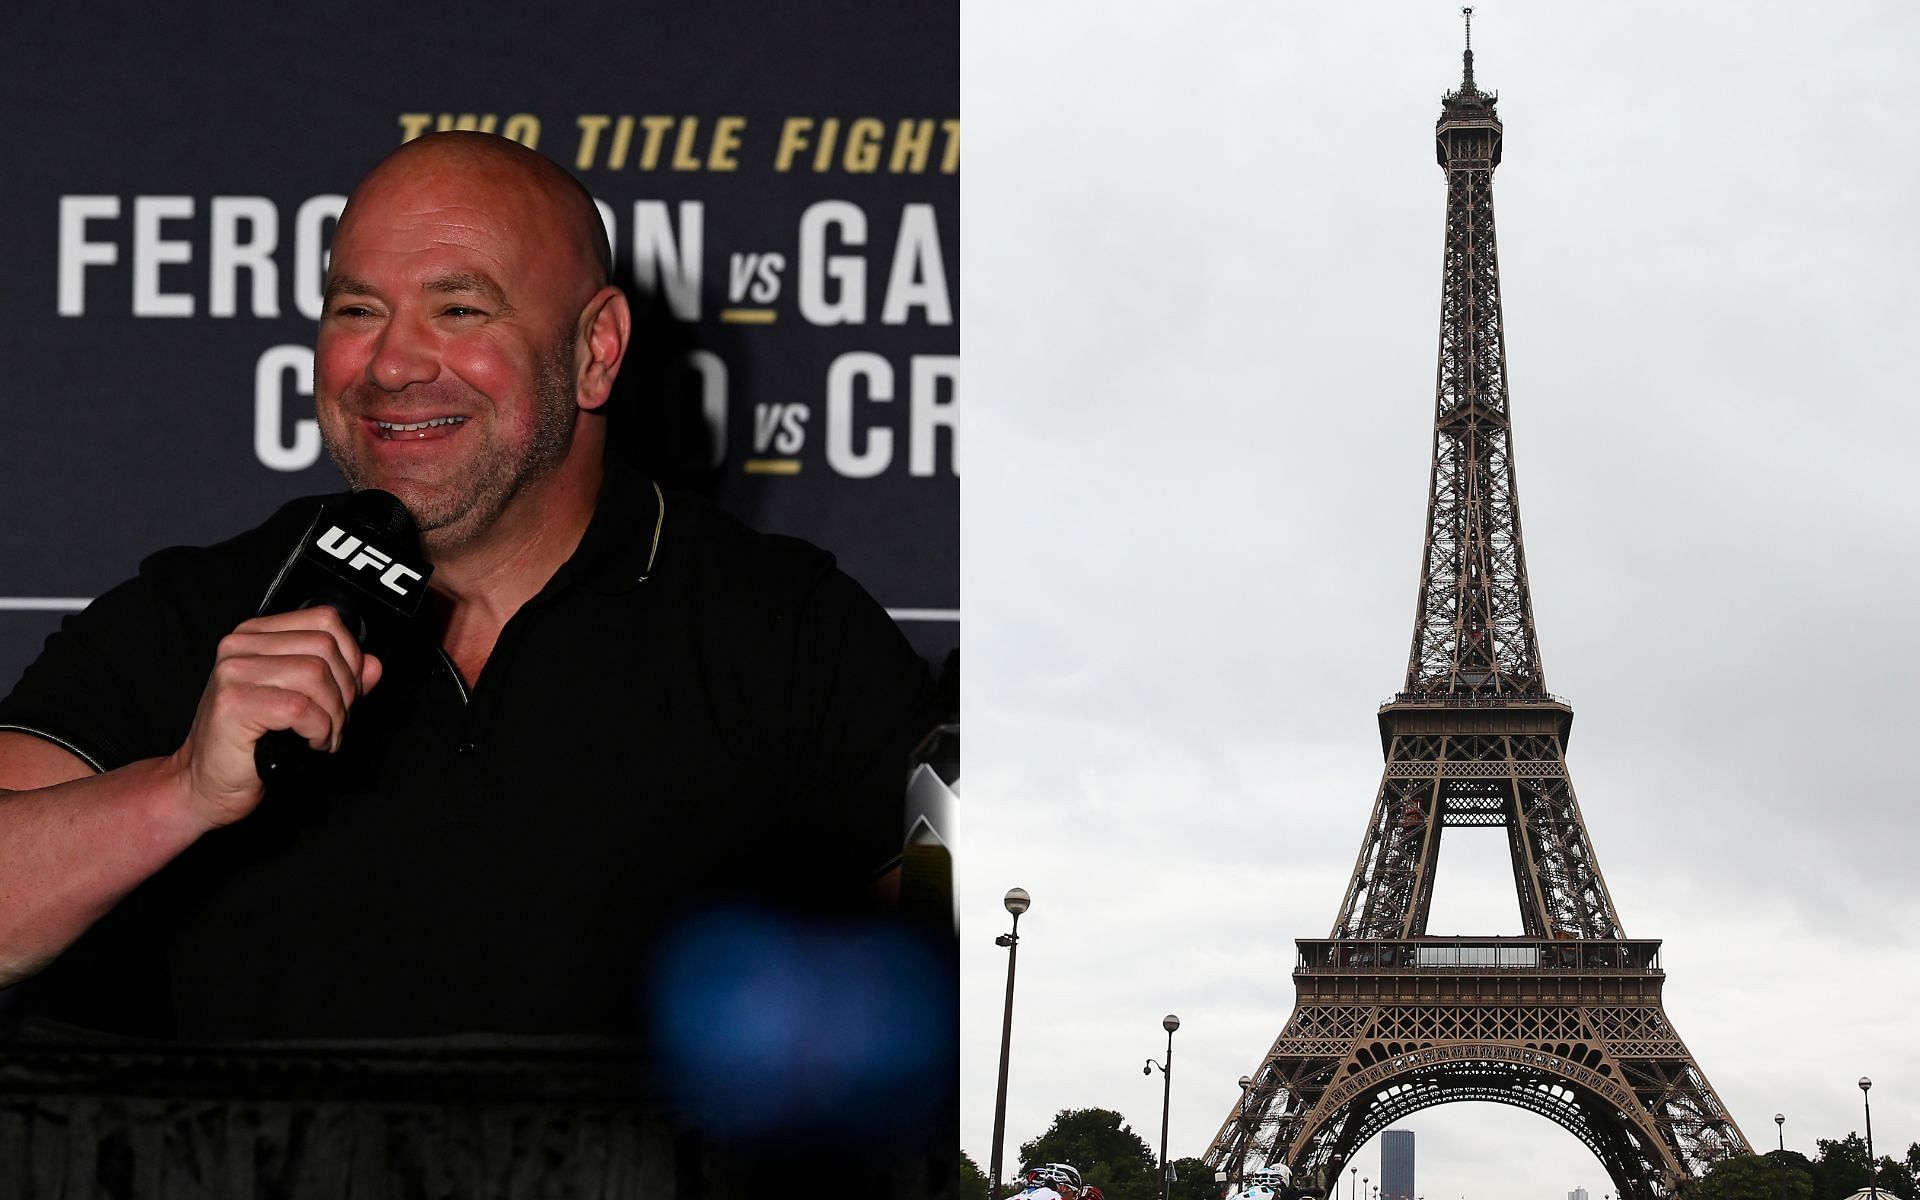 Dana White (left) and The Eiffel Tower (right) (Image credits Getty Images)